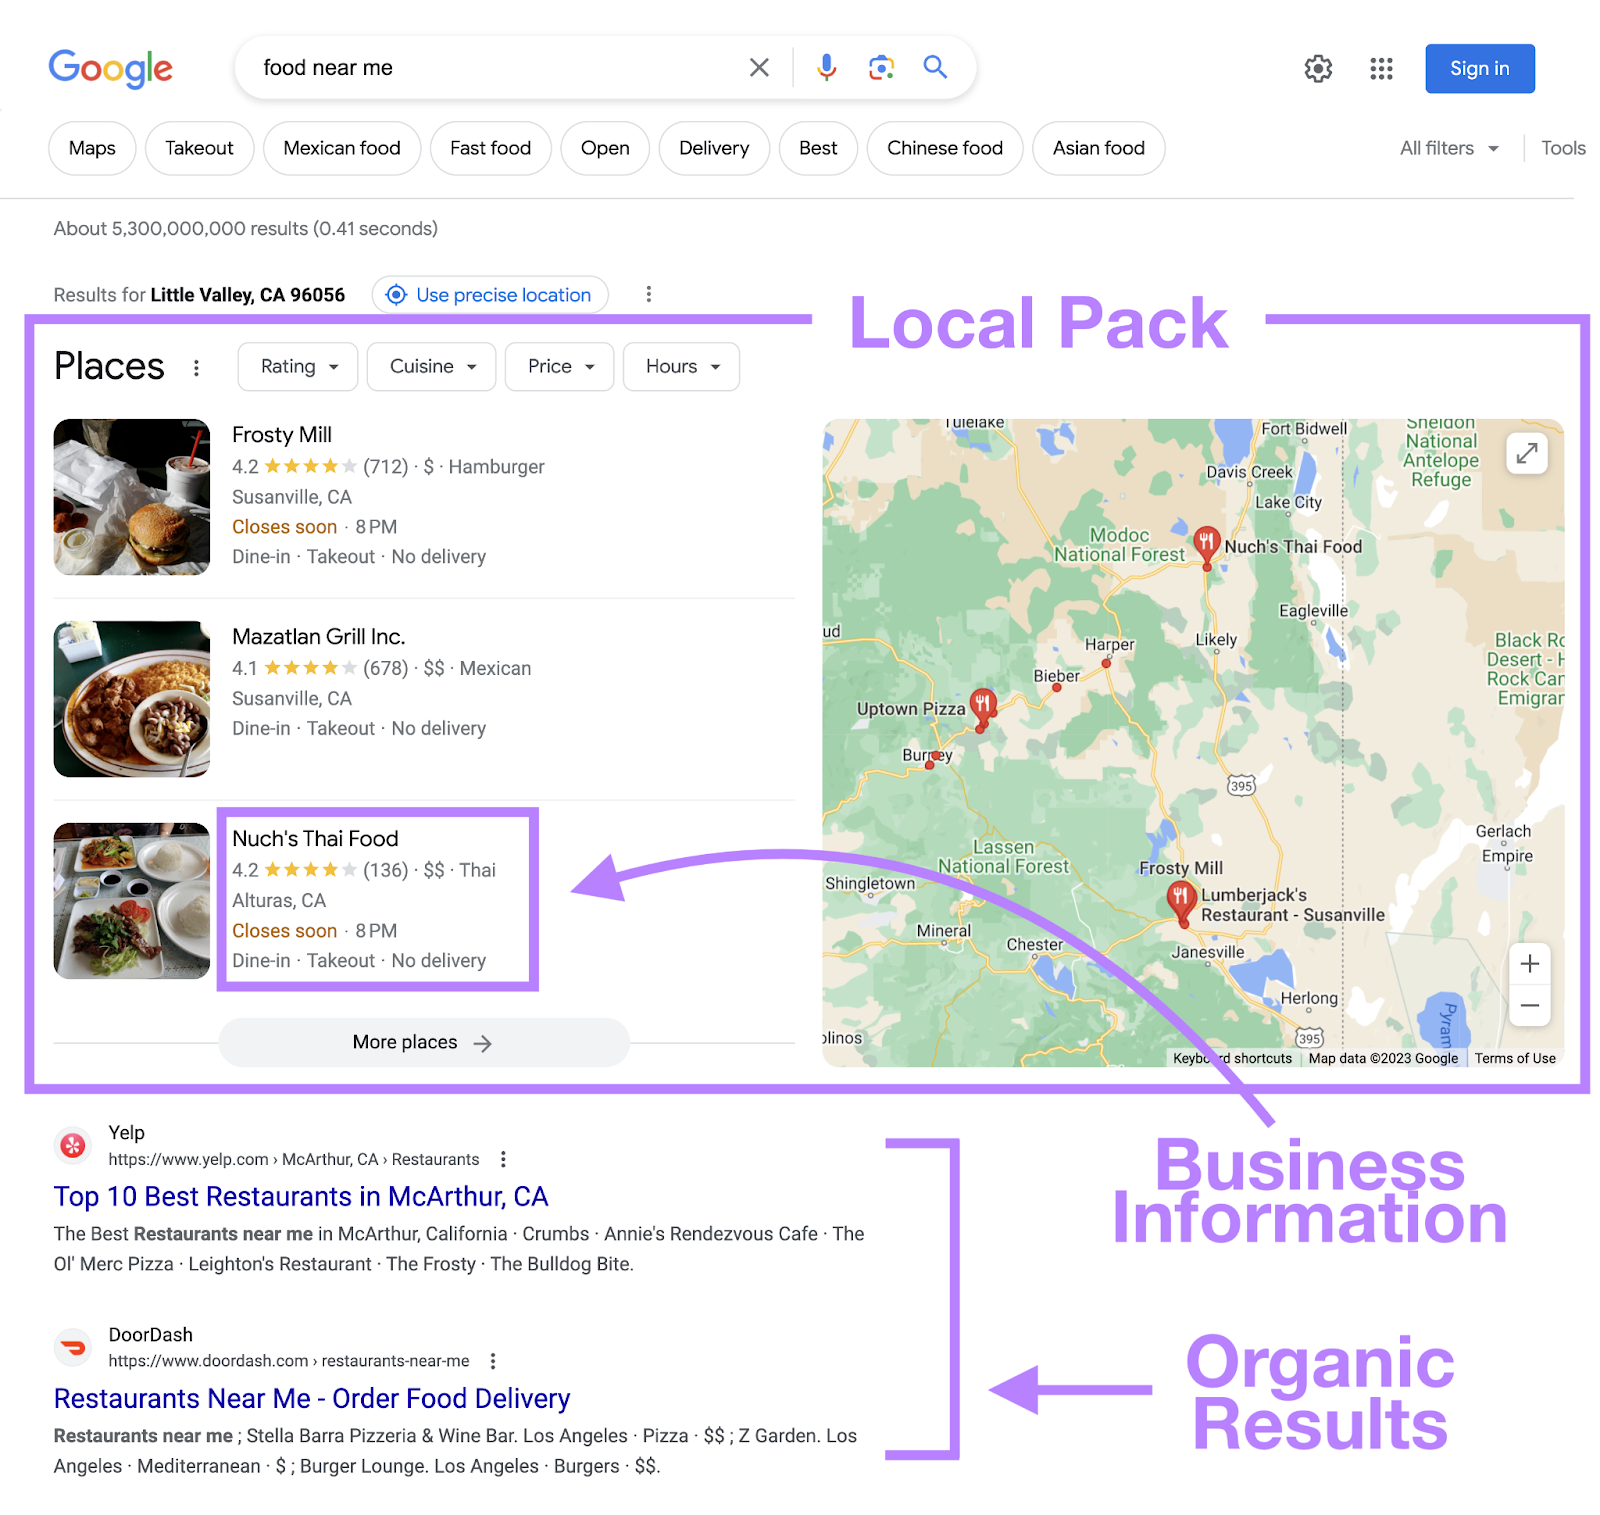 local pack in Google search for "food near me"